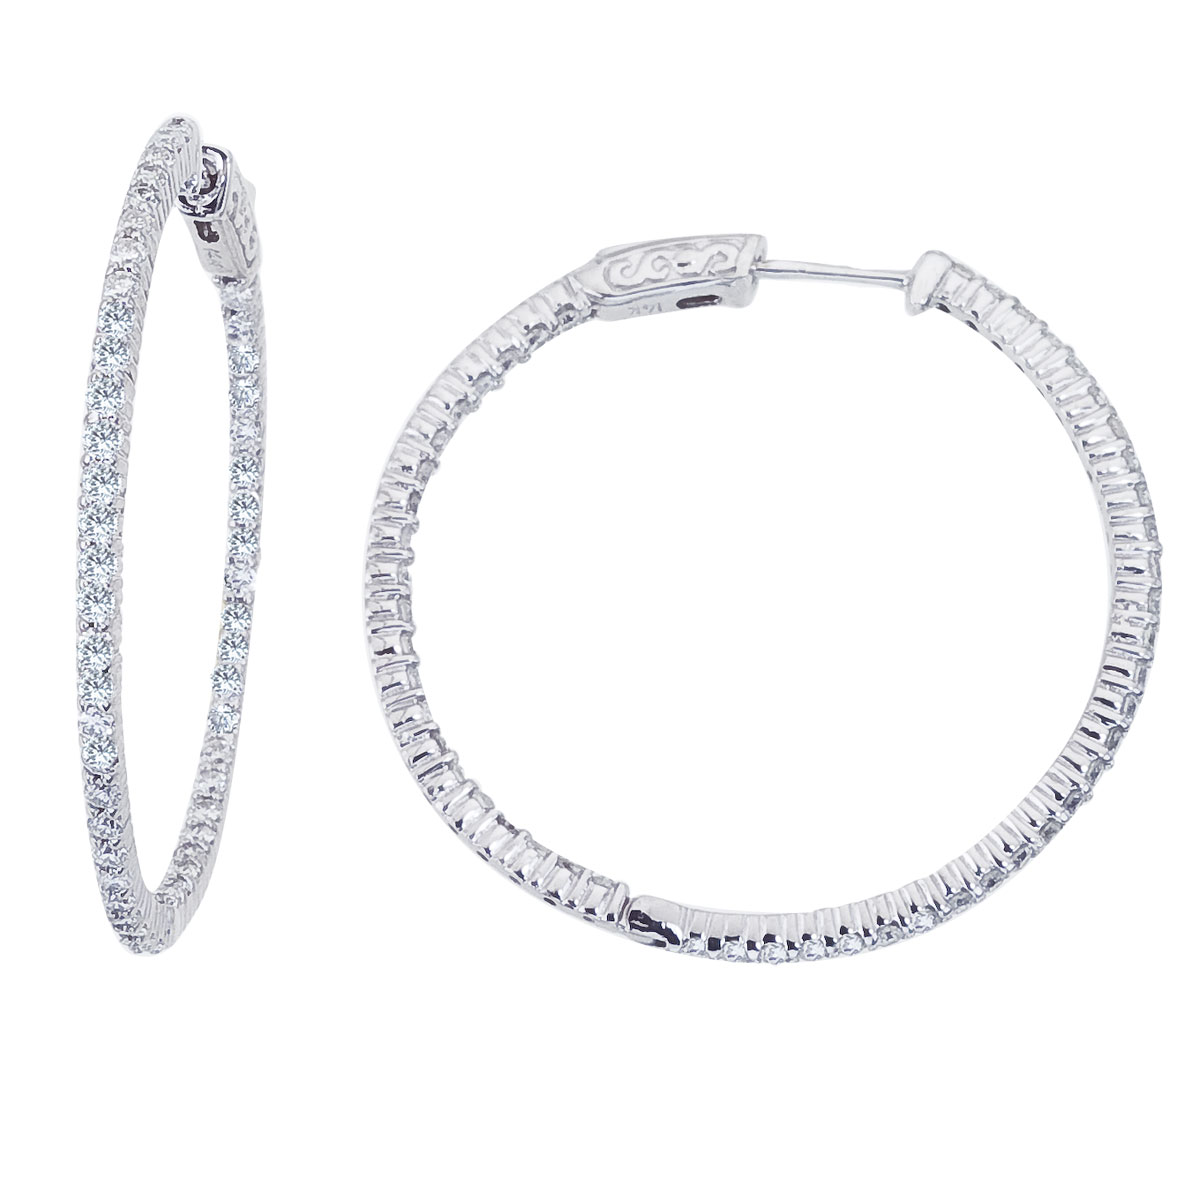 These 35x35 mm patented secure lock inside-outside diamond hoop earrings feature 2 carats of stun...